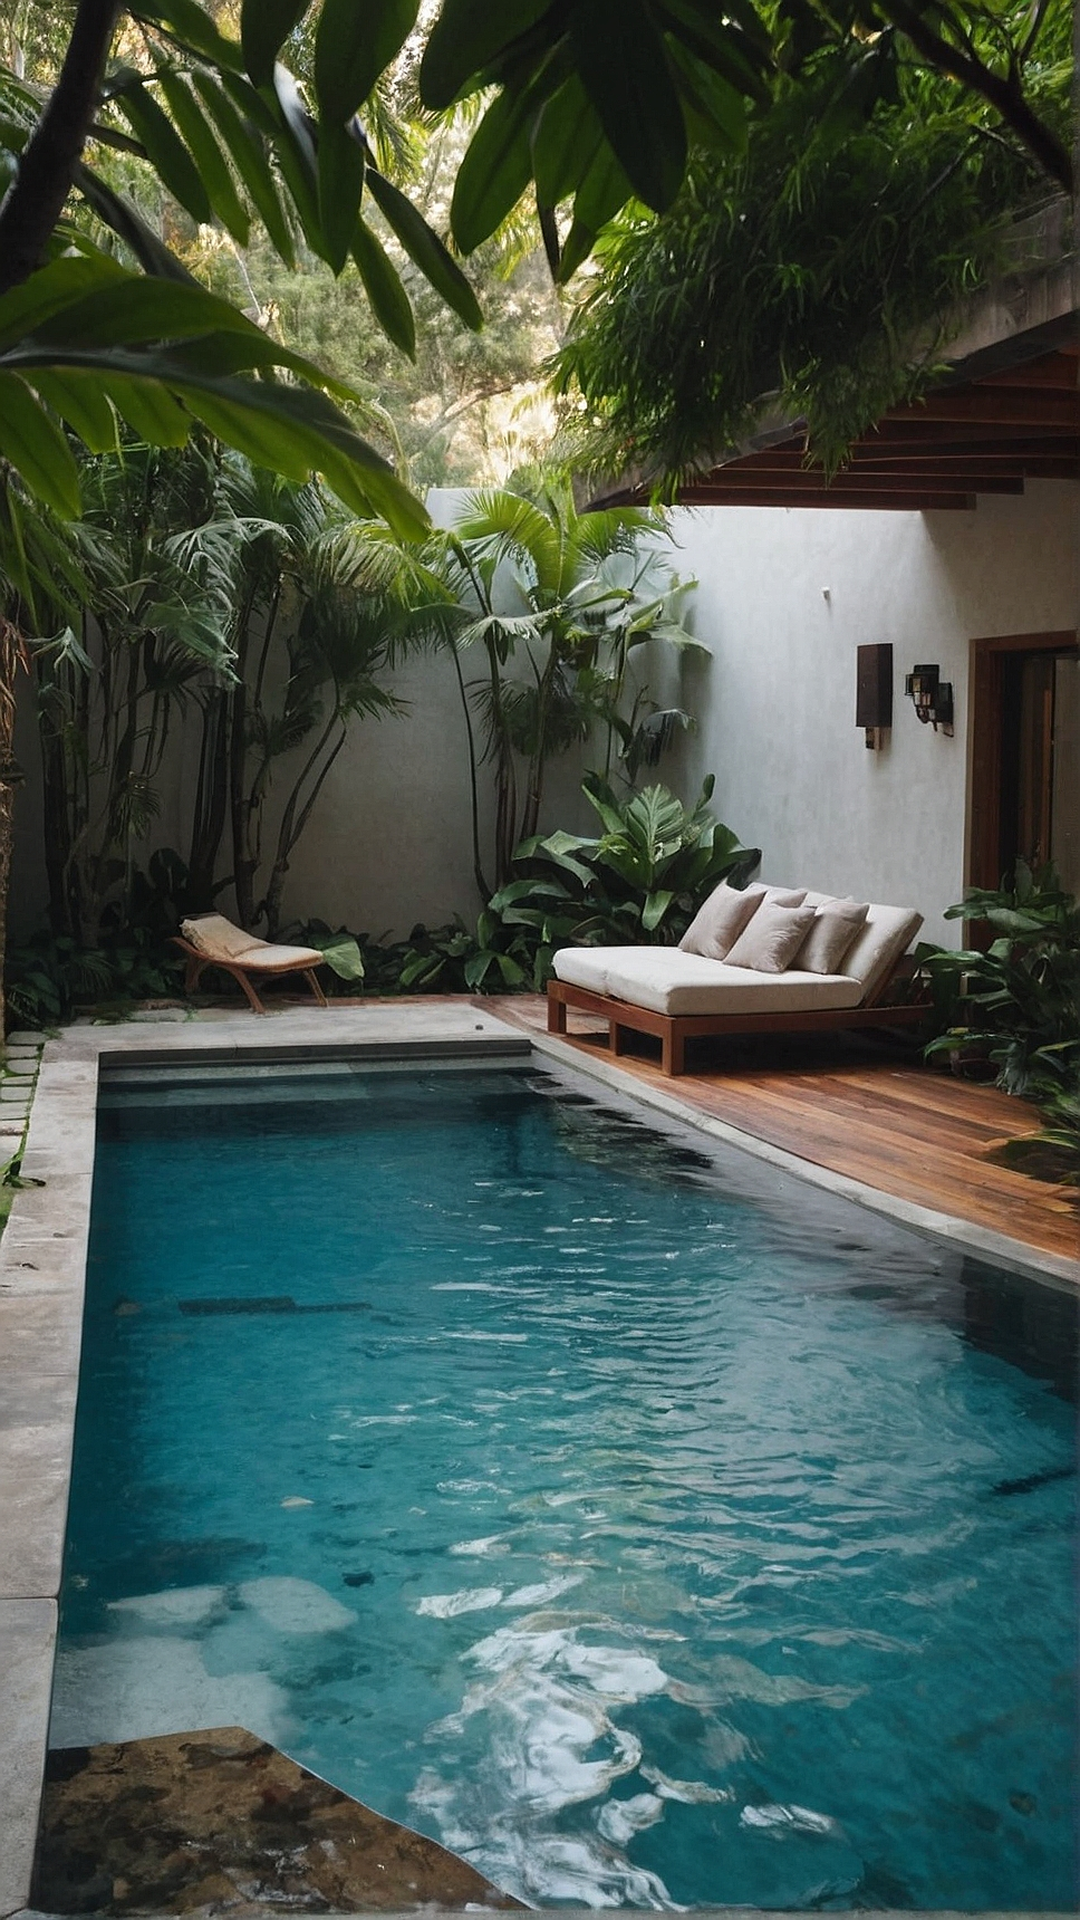 Serene Sanctuary: Pool Design Inspiration from Nature